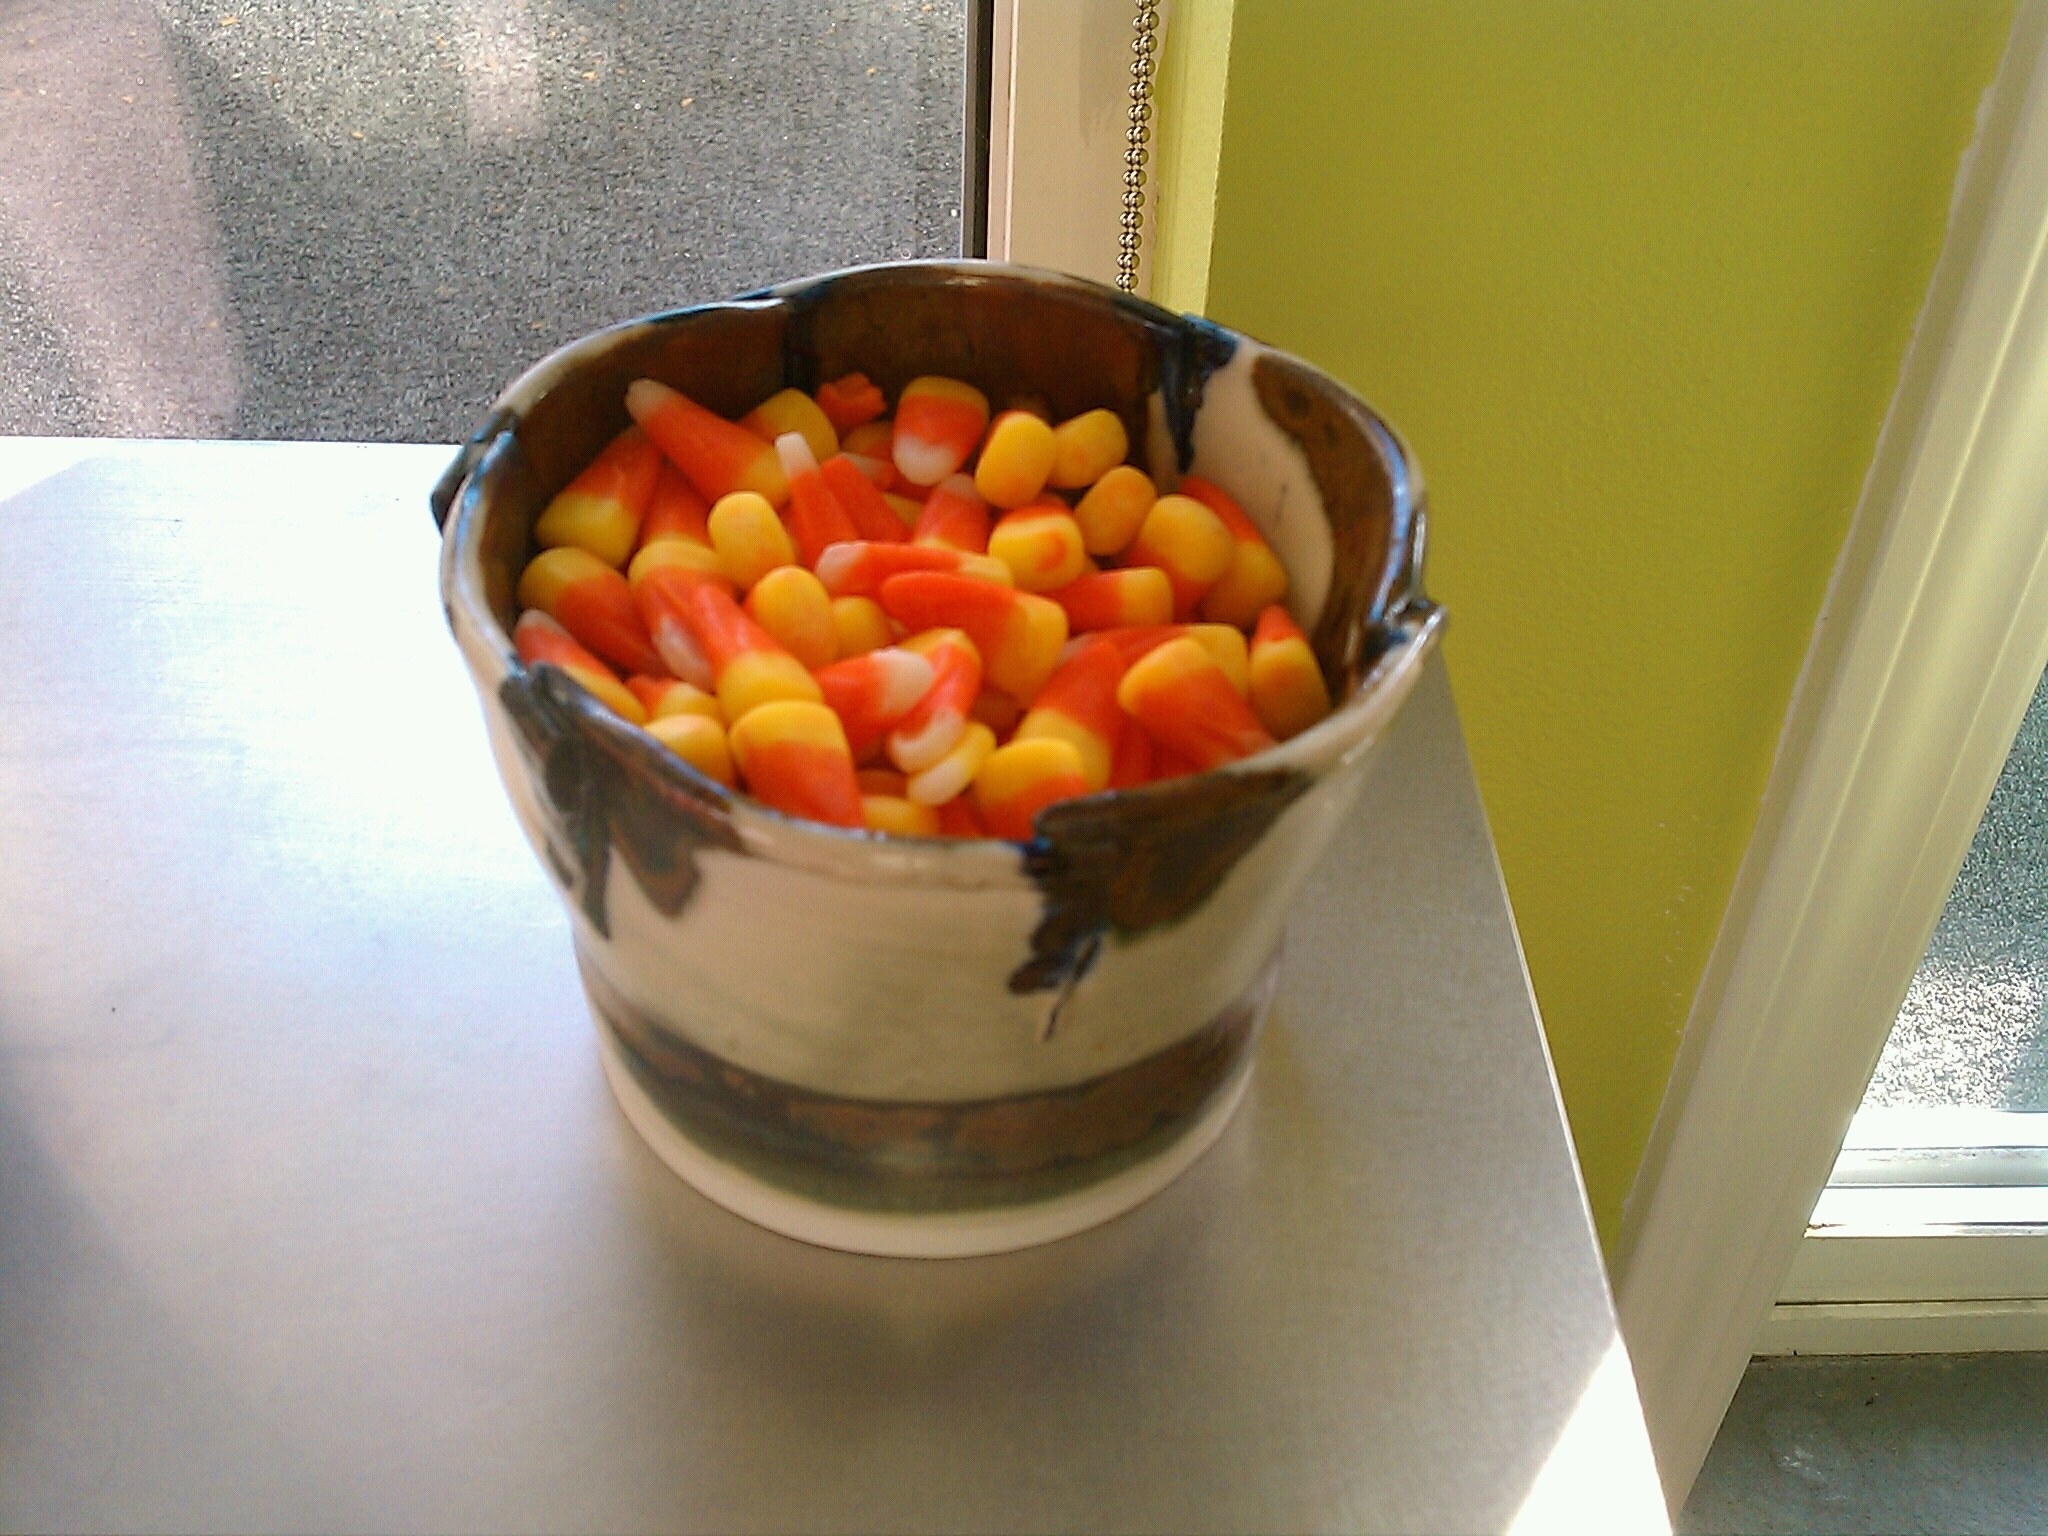 A bowl of candy corn sitting on a counter.